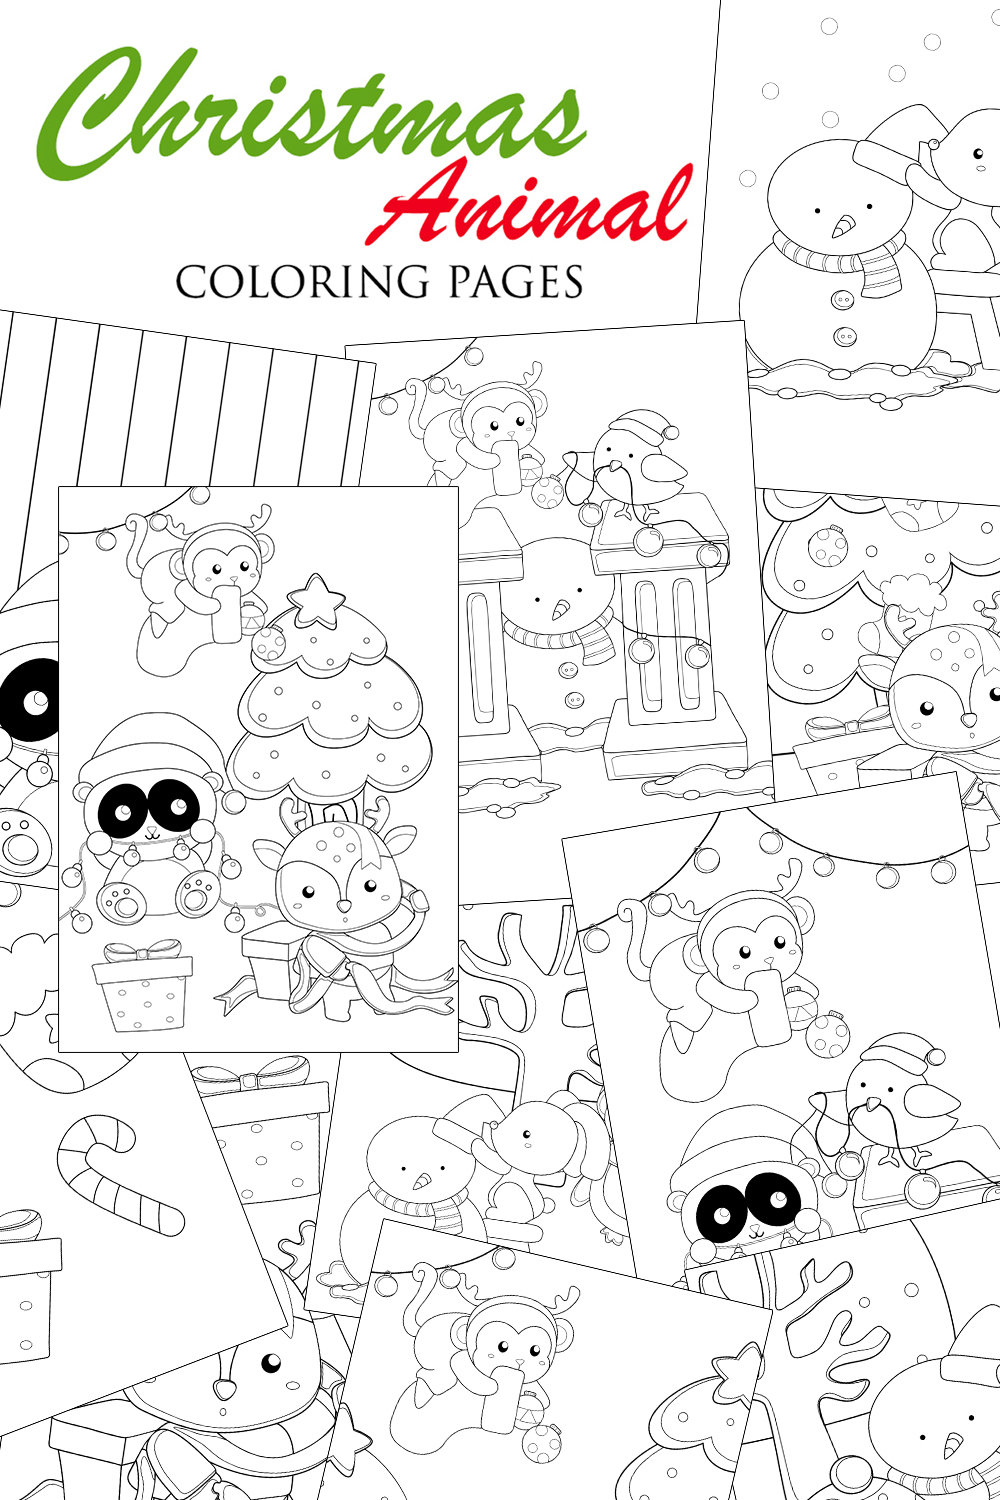 Christmas Animals Forest Bird Penguin Rabbit Panda Deer Monkey Winter Snowman Holiday Cartoon Coloring Pages for Kids and Adult pinterest preview image.